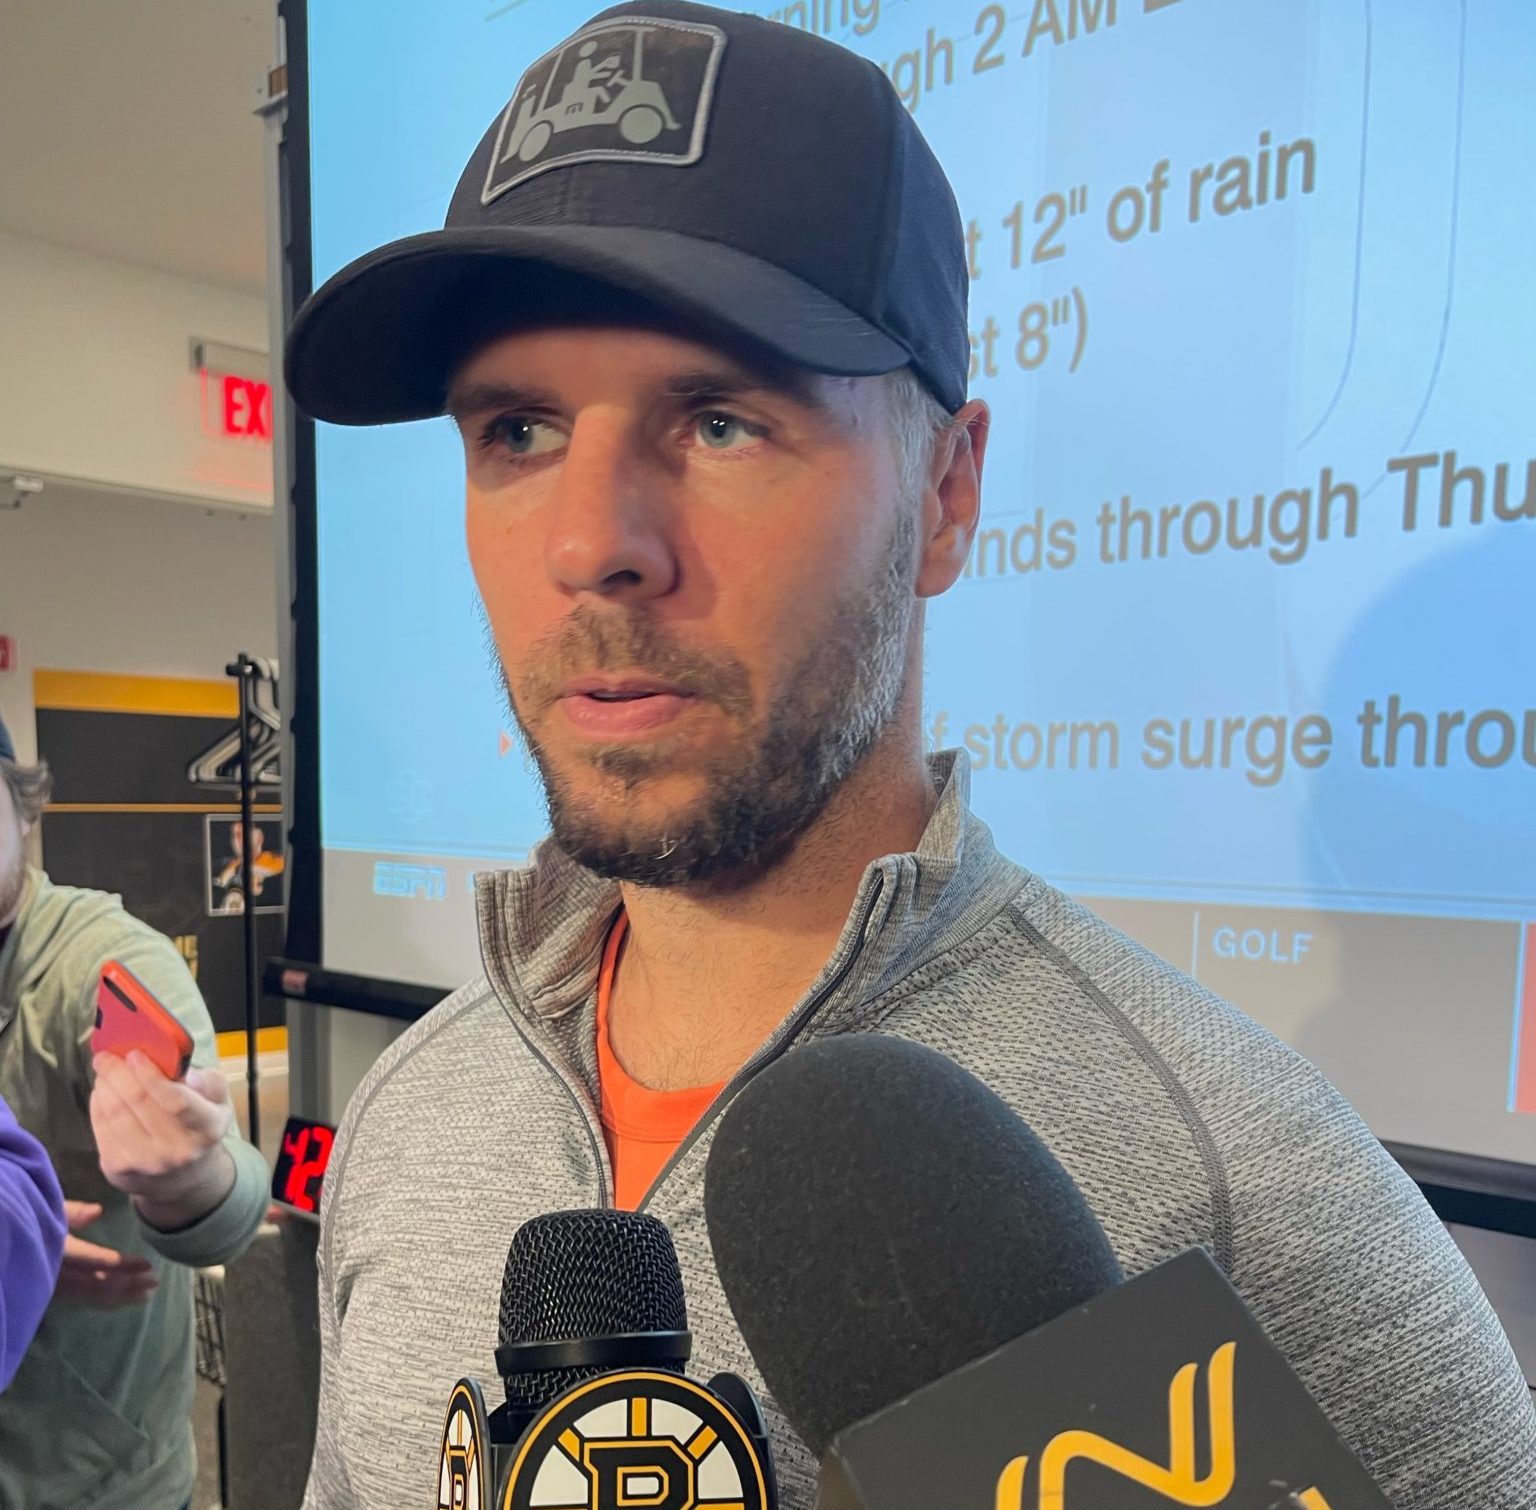 Krejci's hat during post game interview. Anyone know where to get this?  Checked online pro shop but it's not on there : r/BostonBruins